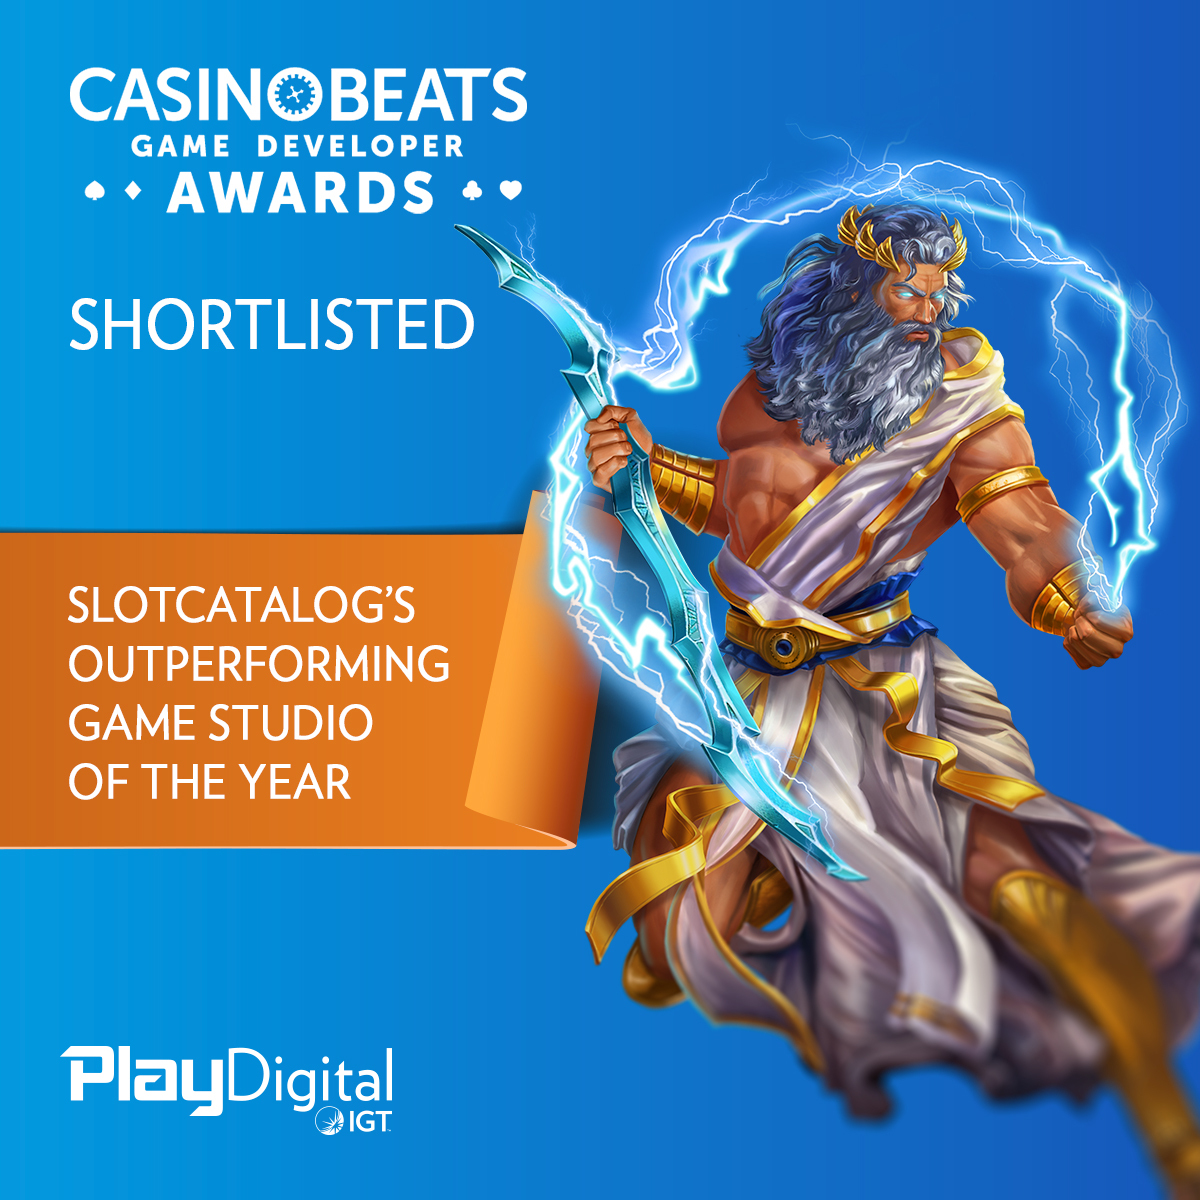 We’re excited to announce that IGT PlayDigital has been shortlisted for SlotCatalog’s Outperforming Game Studio of the Year at the @casinobeatsnews  Game Developer Awards!

